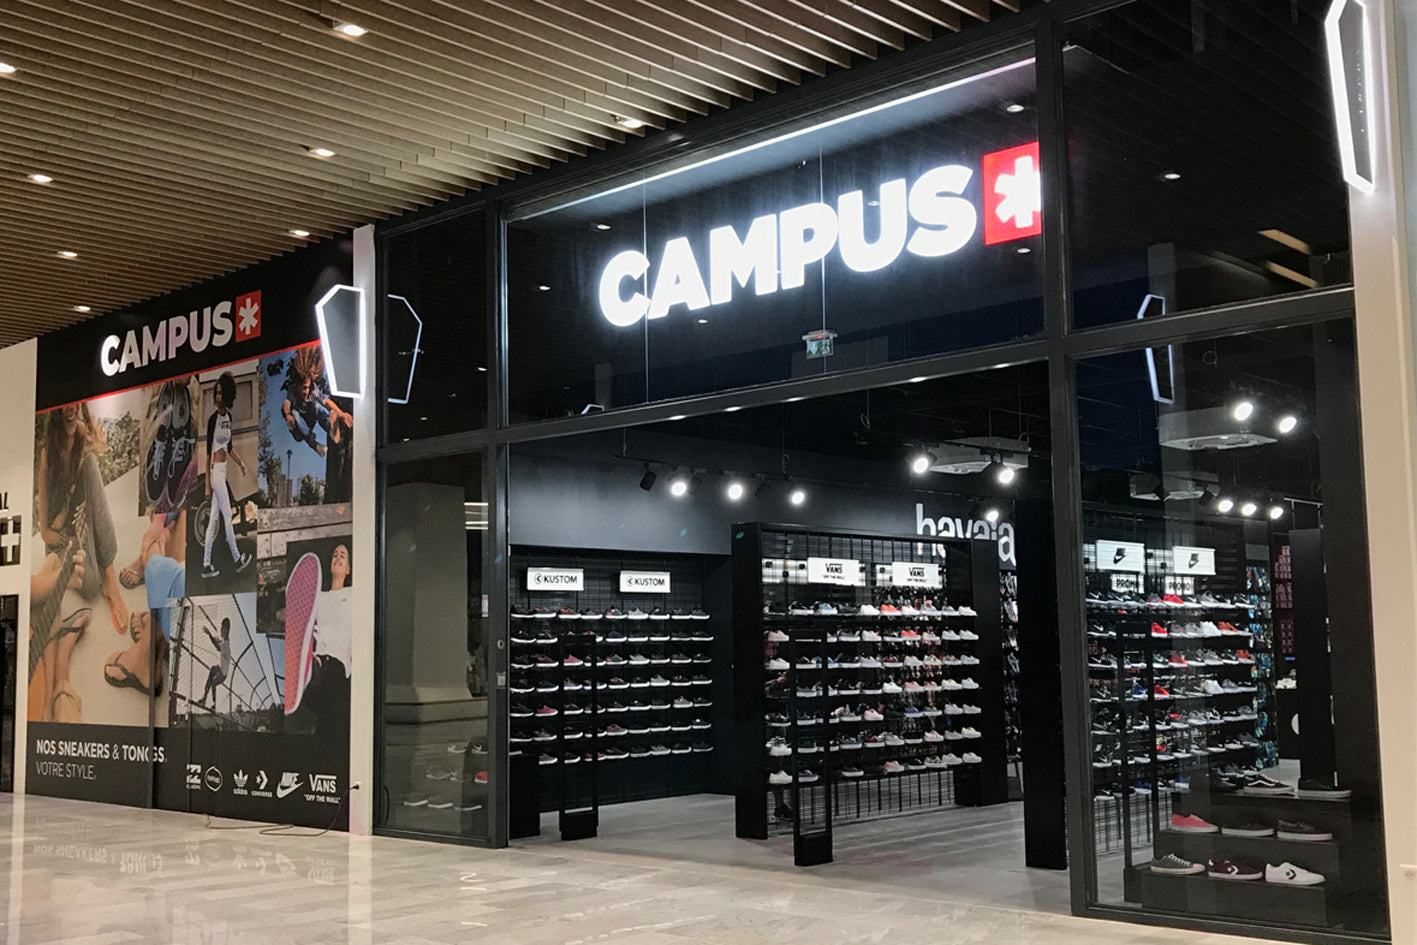 CAMPUS DUMBEA MALL IS OPEN